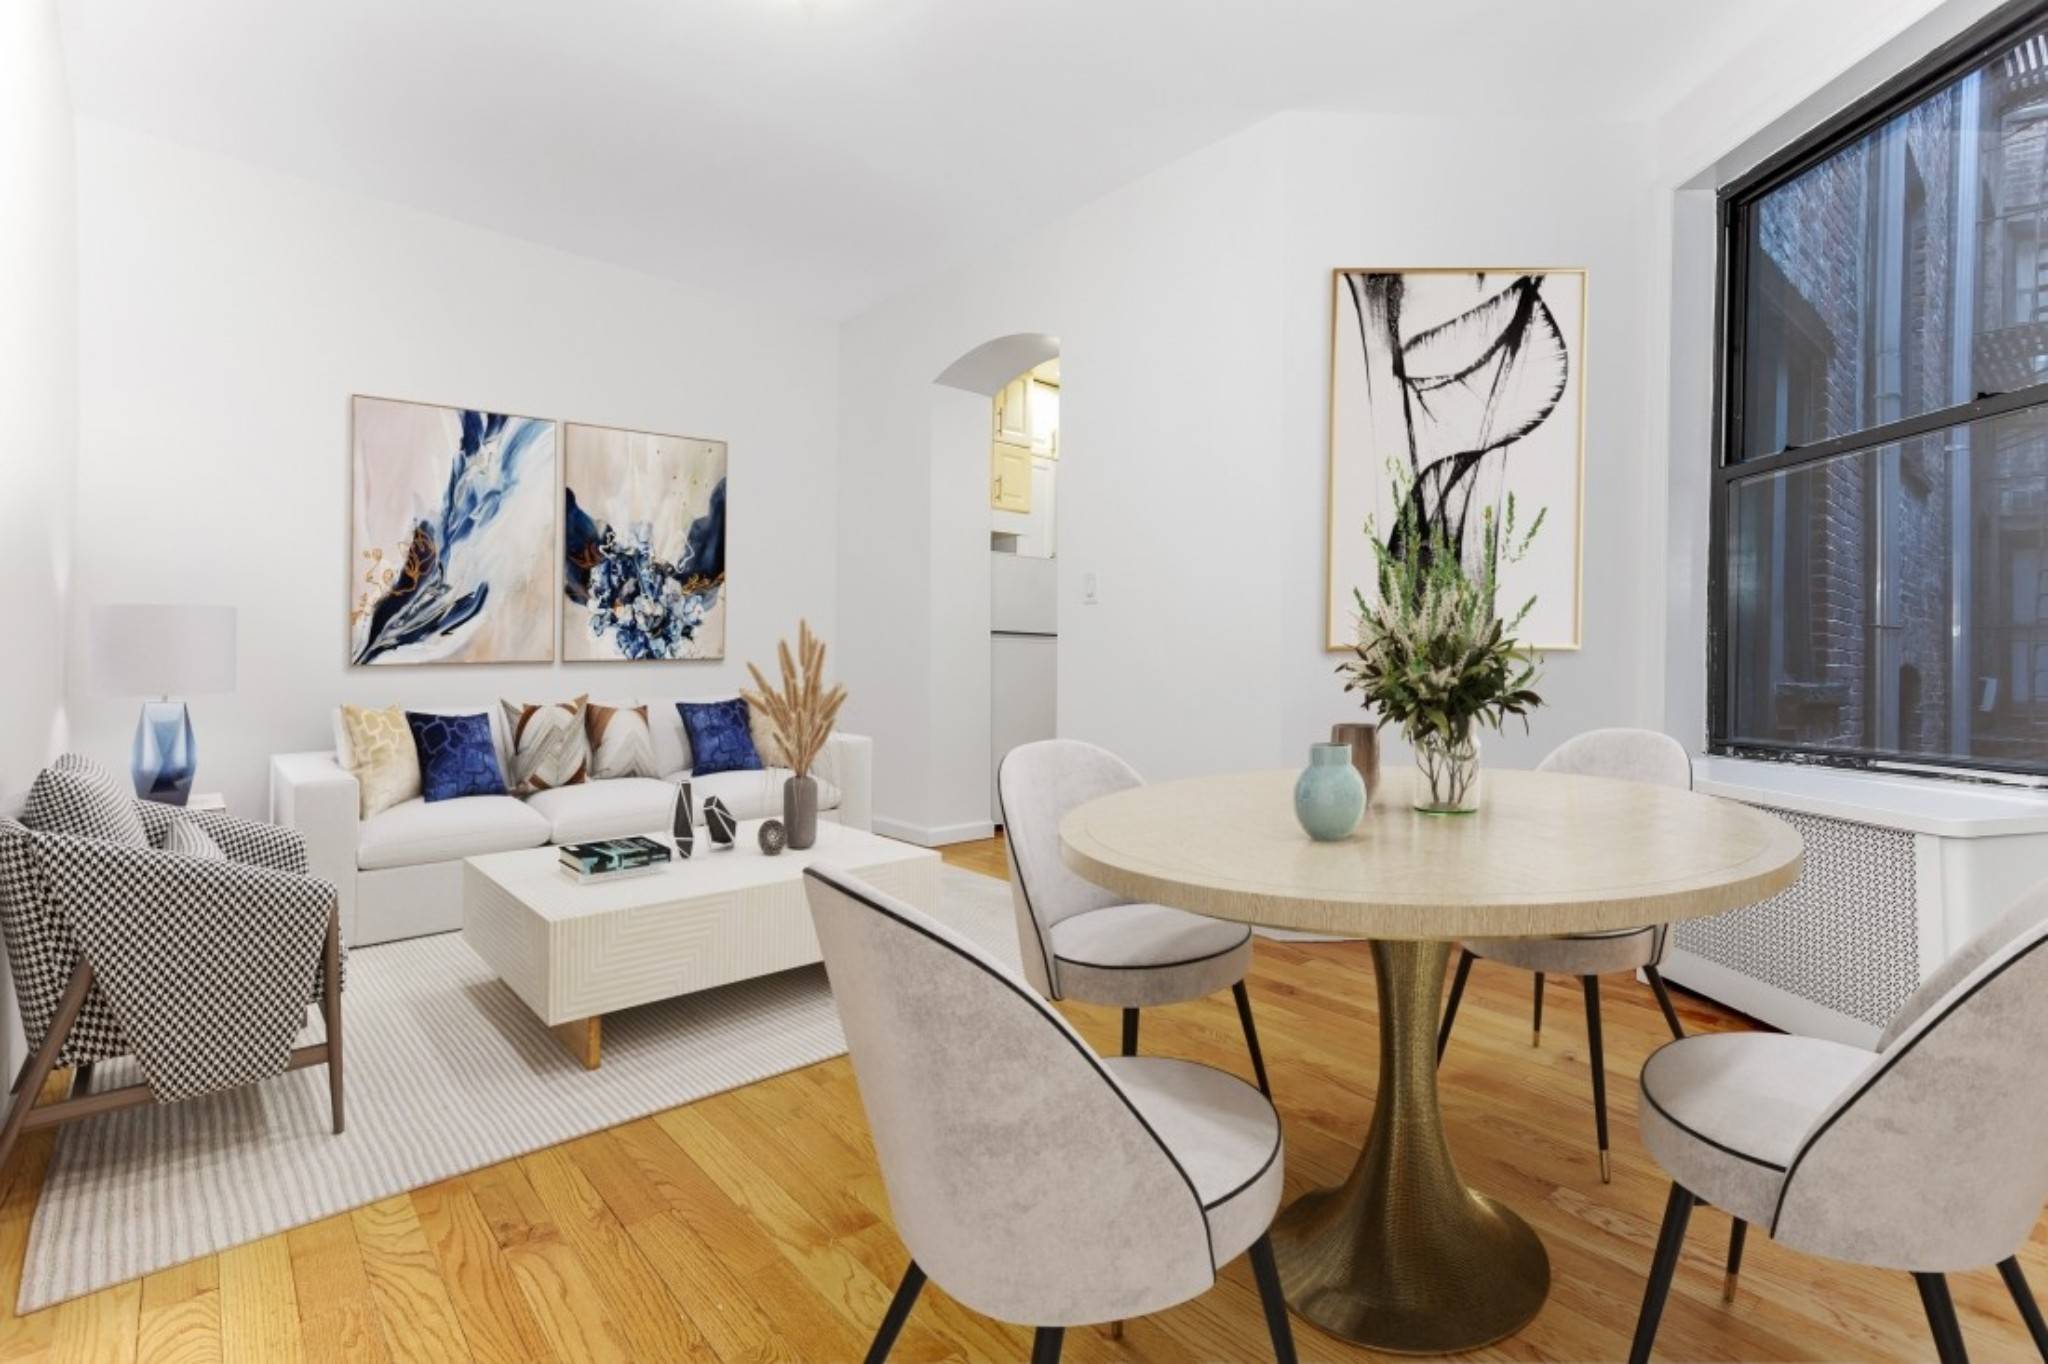 INQUIRE FOR A VIDEOAVAILABLE STARTING JUNE 1STCome and see this prime 78th Street location, a true two bedroom, one bathroom on East 78th Street off Second Avenue.